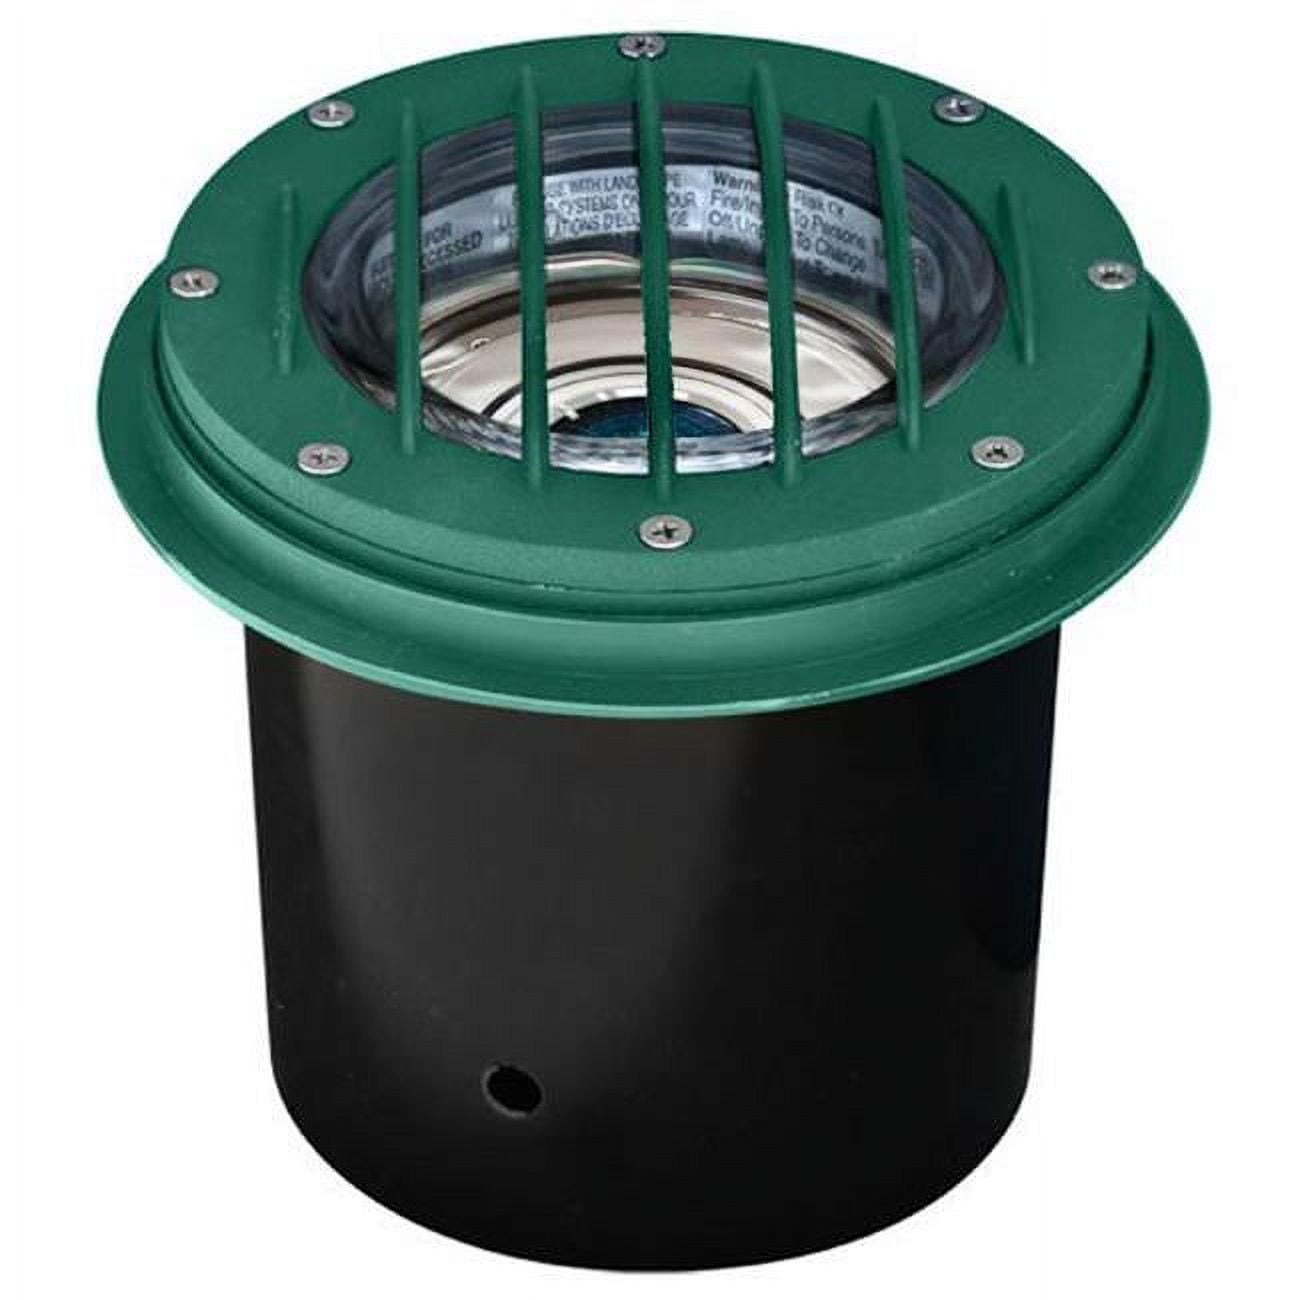 Wall Light With Grill Adjustable 3w Led - Mr16 12v, Green